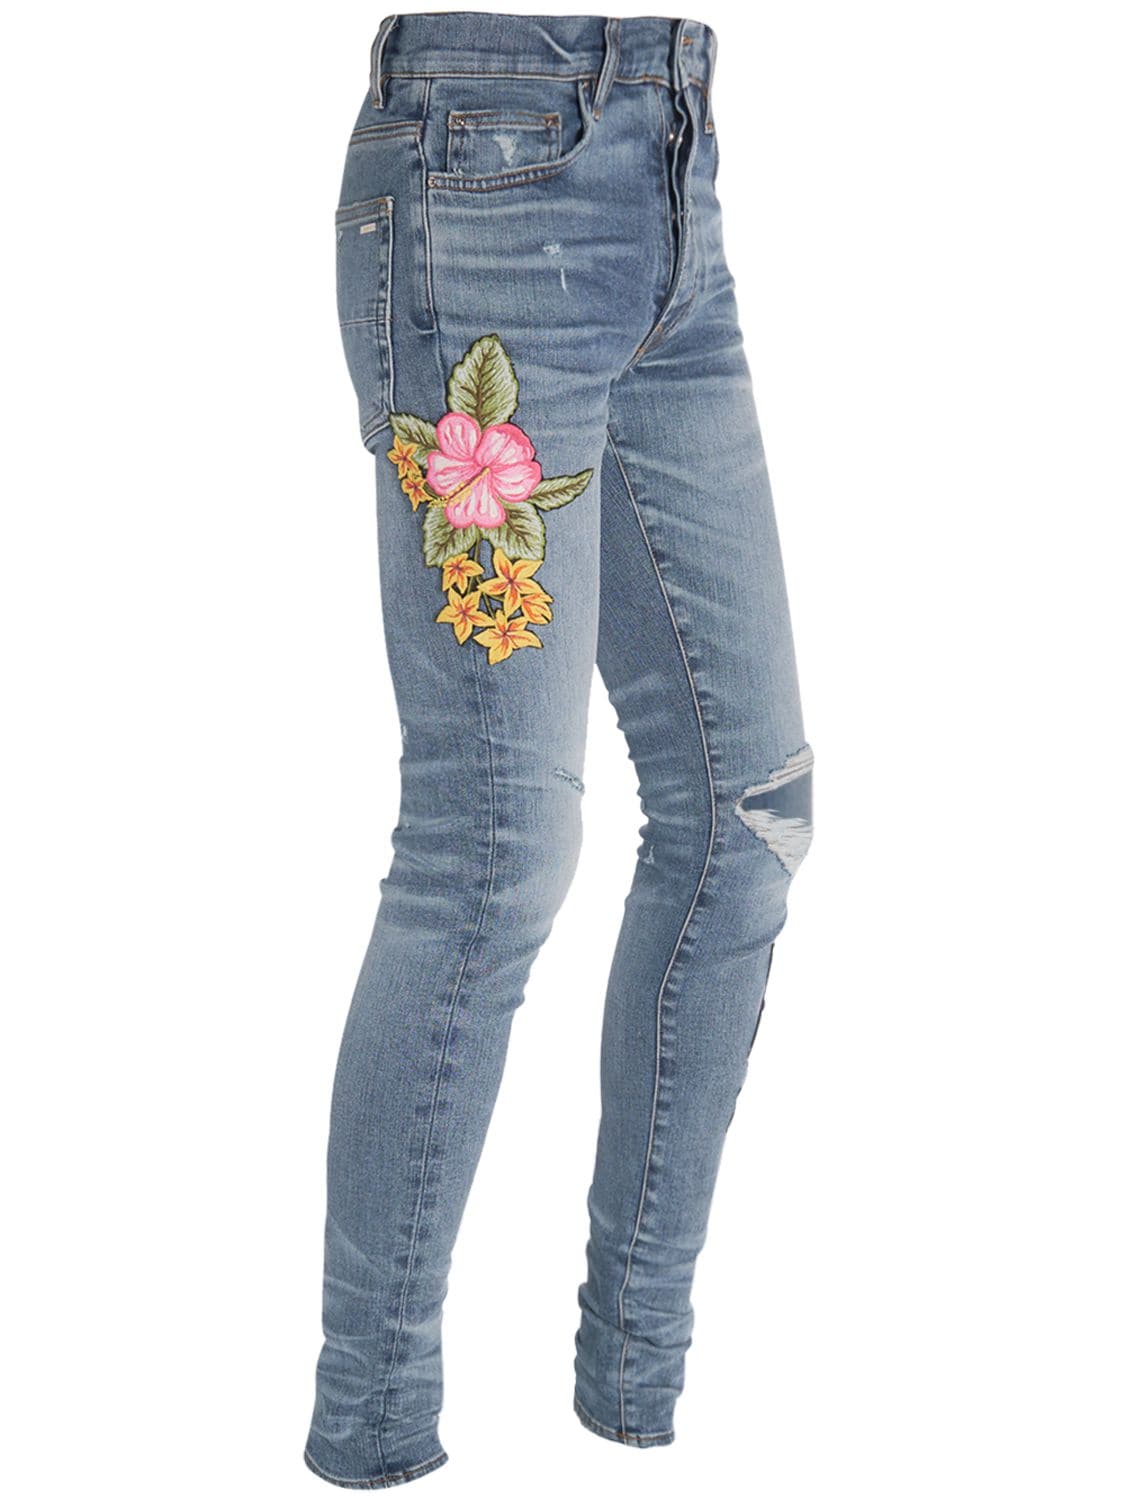 jeans with flower patches